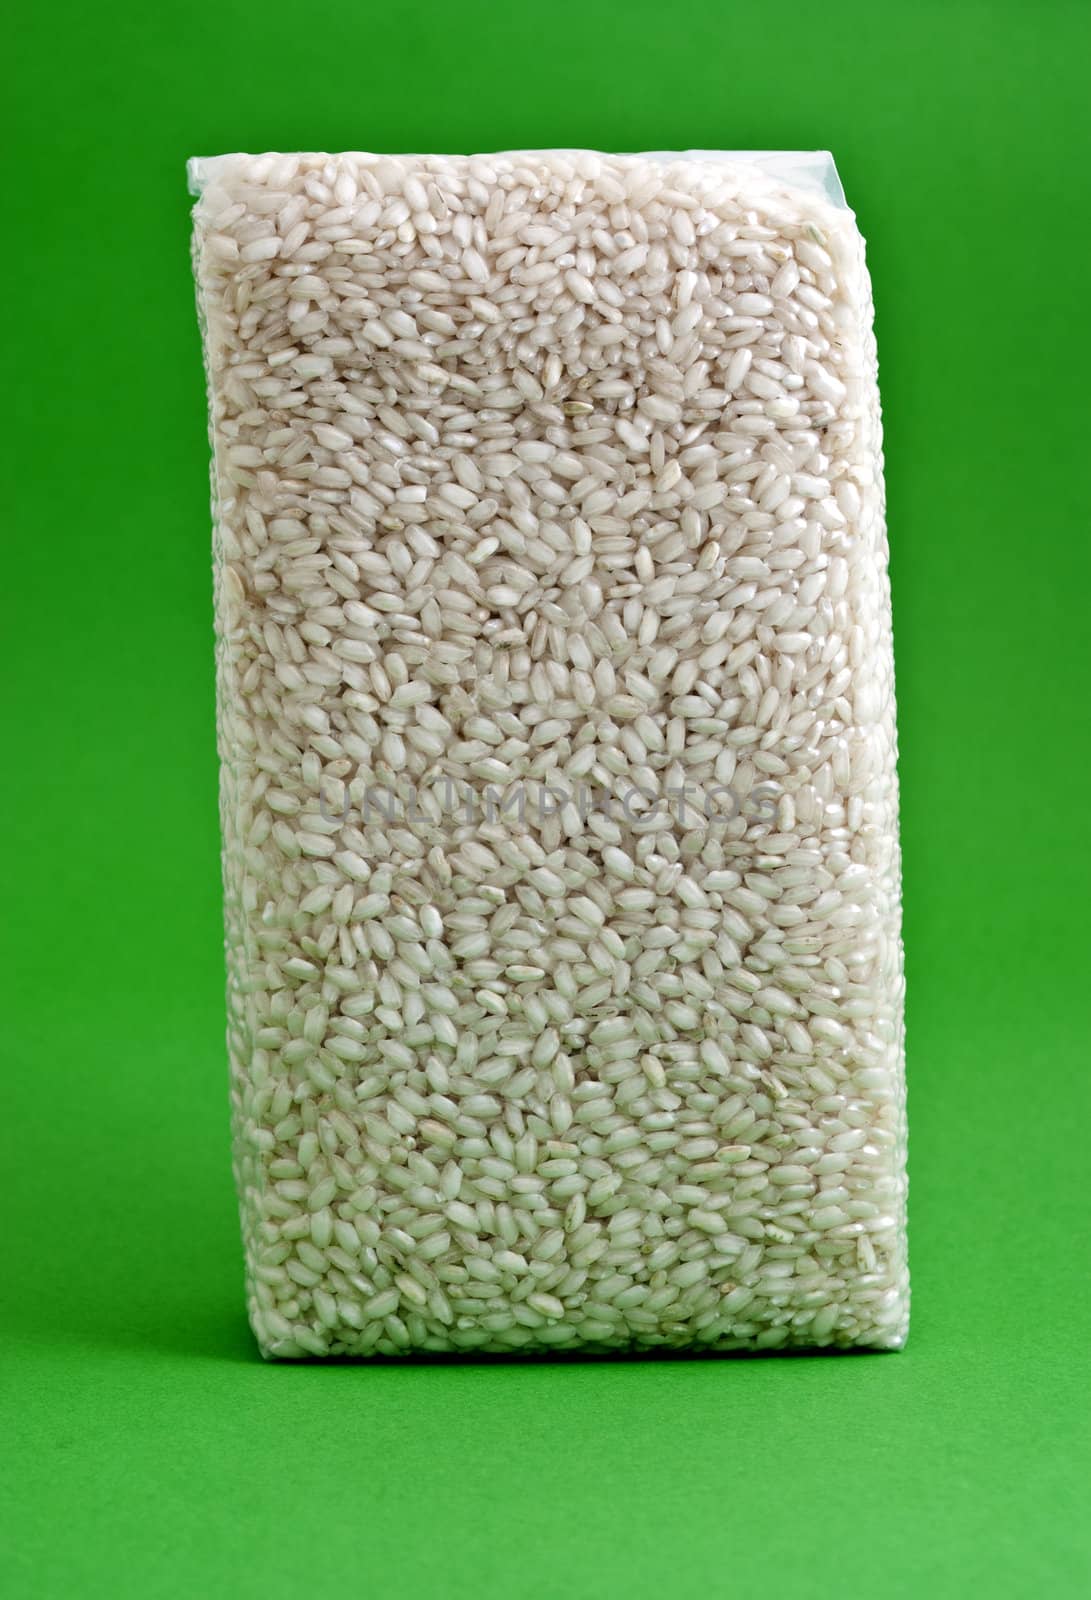 vacuum packed rice by lauria